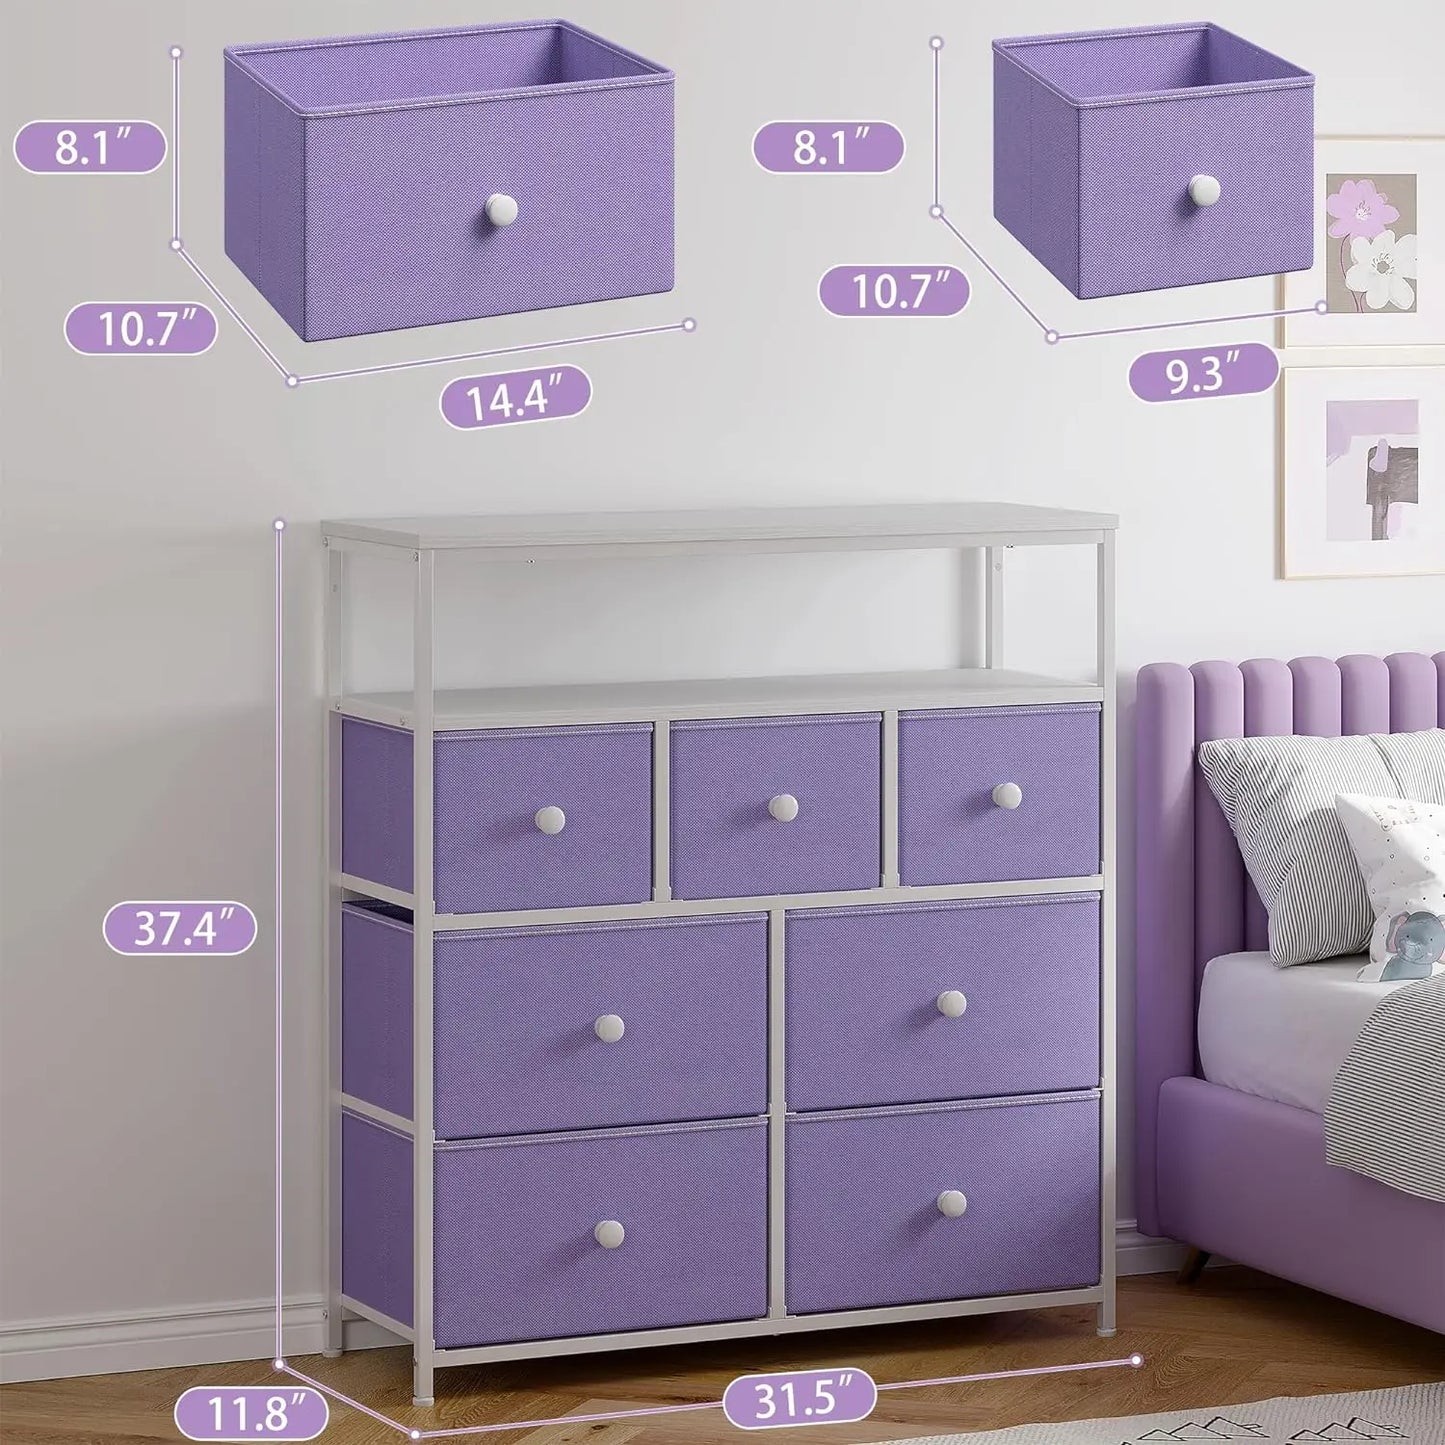 Purple Dresser with 7 Drawers and 2 Shelves, TV Stand Dresser with Wooden Top and Metal Frame, Tall Dressers & Chest of Drawers